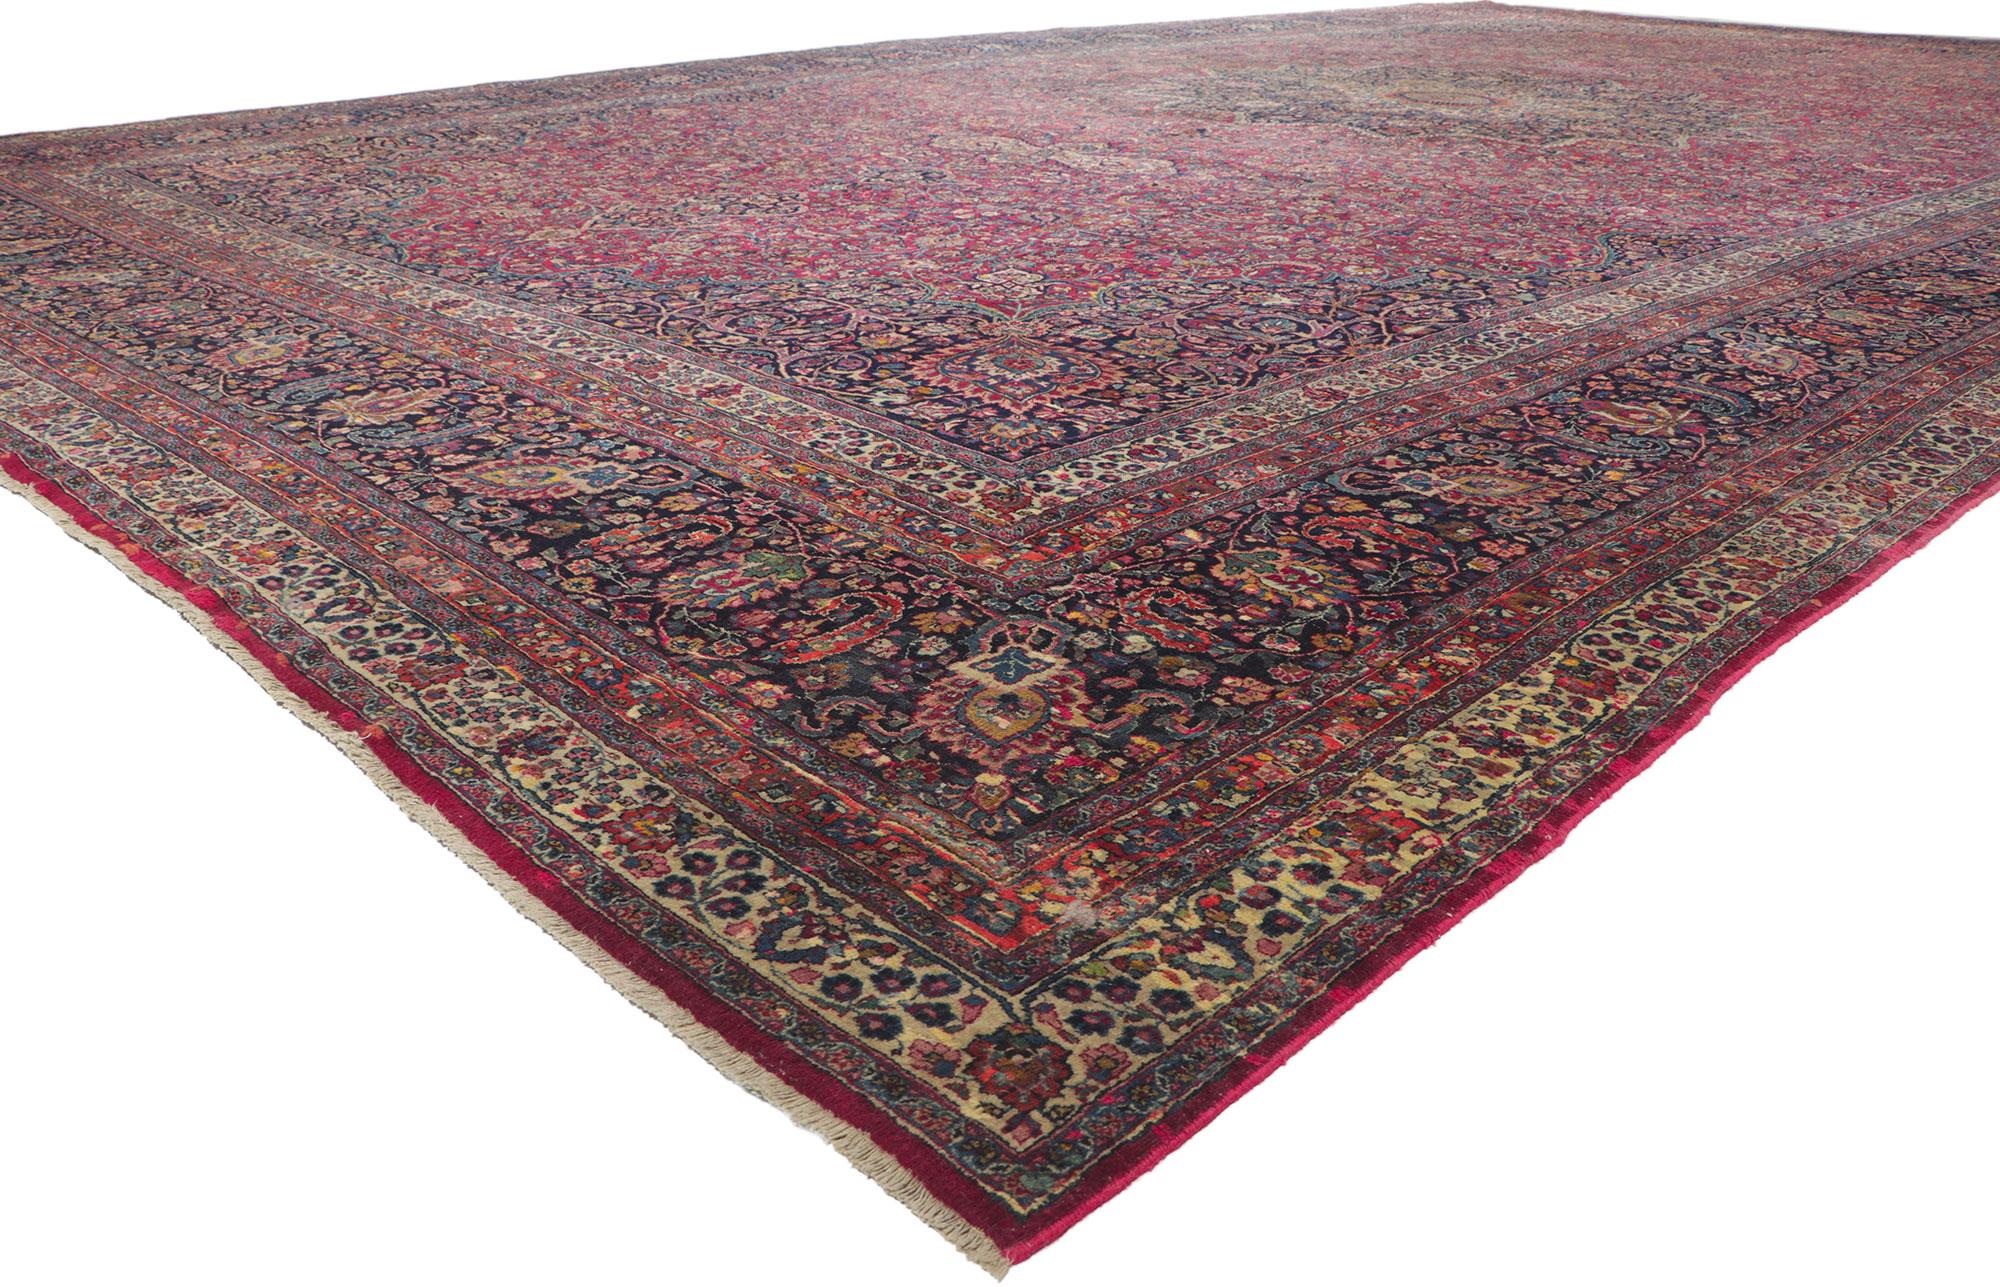 78415 antique Persian Mashhad rug, 14'03 x 24'08. ???With its palatial dimensions, incredible detail and texture, this hand knotted wool antique Persian Mashhad rug is a captivating vision of woven beauty. The timeless botanical design and refined